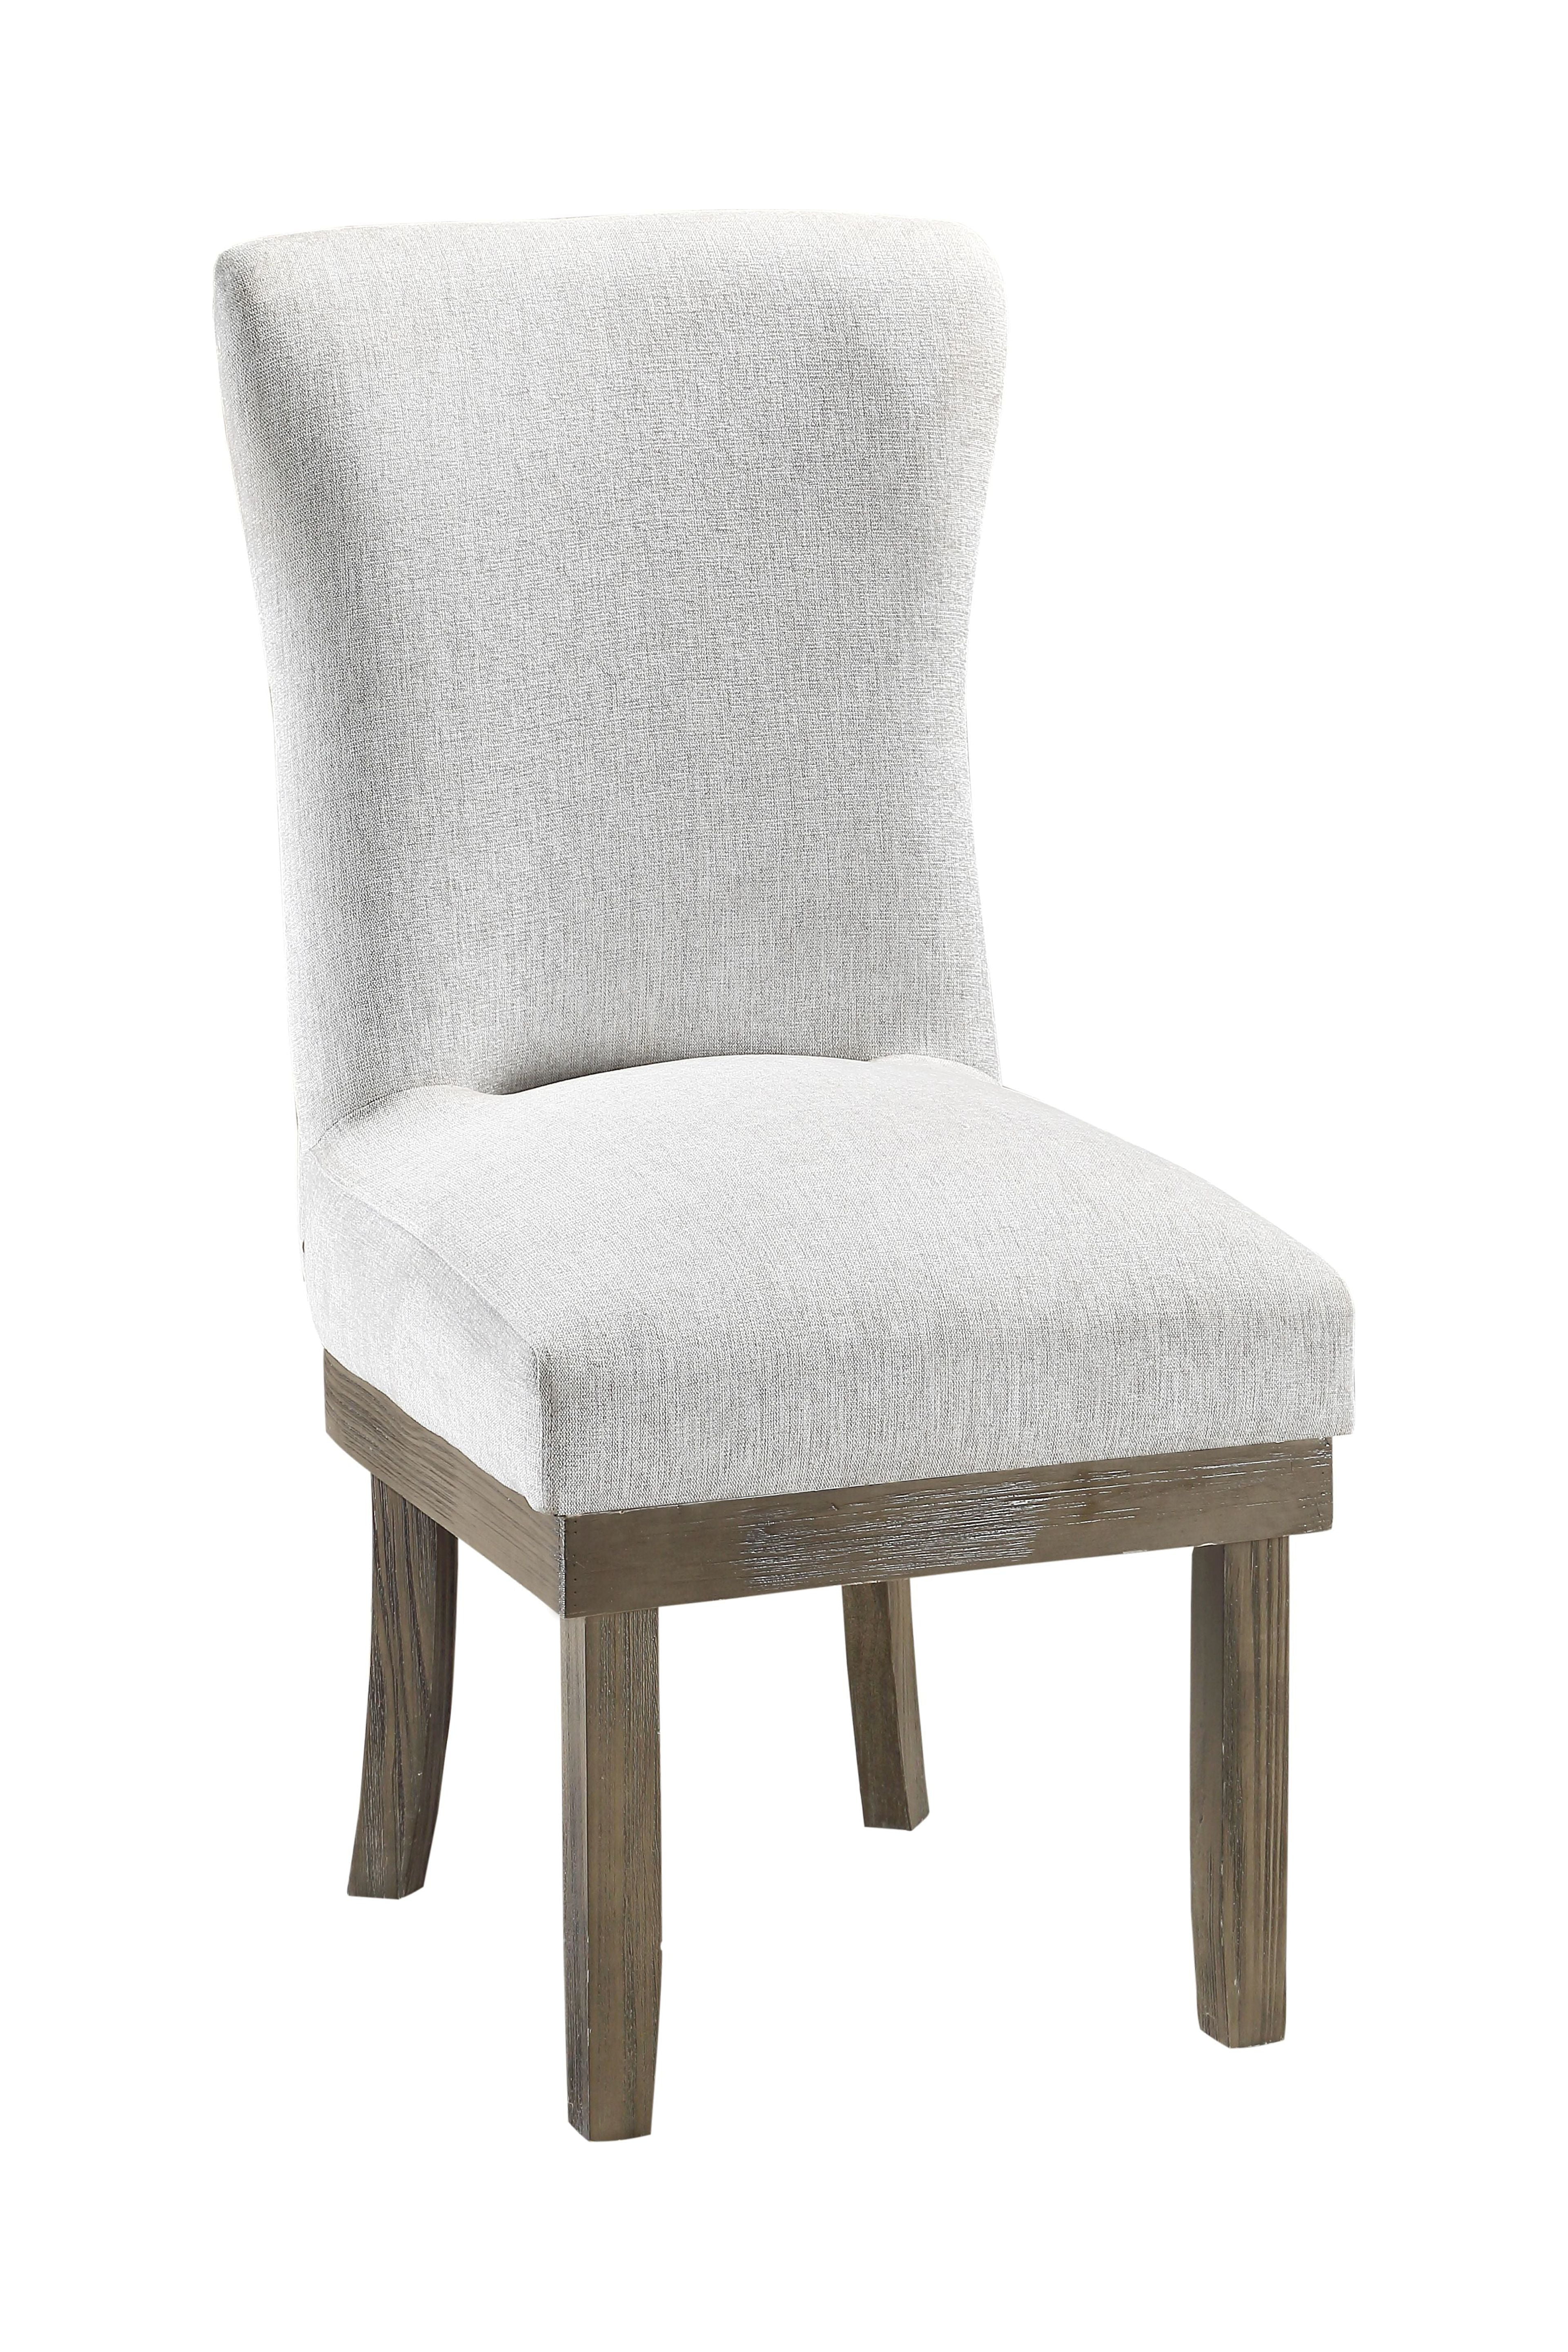 Picture of Acme Furniture DN00951 20 x 24 x 41 in. Landon Side Chair, Gray Linen - Set of 2